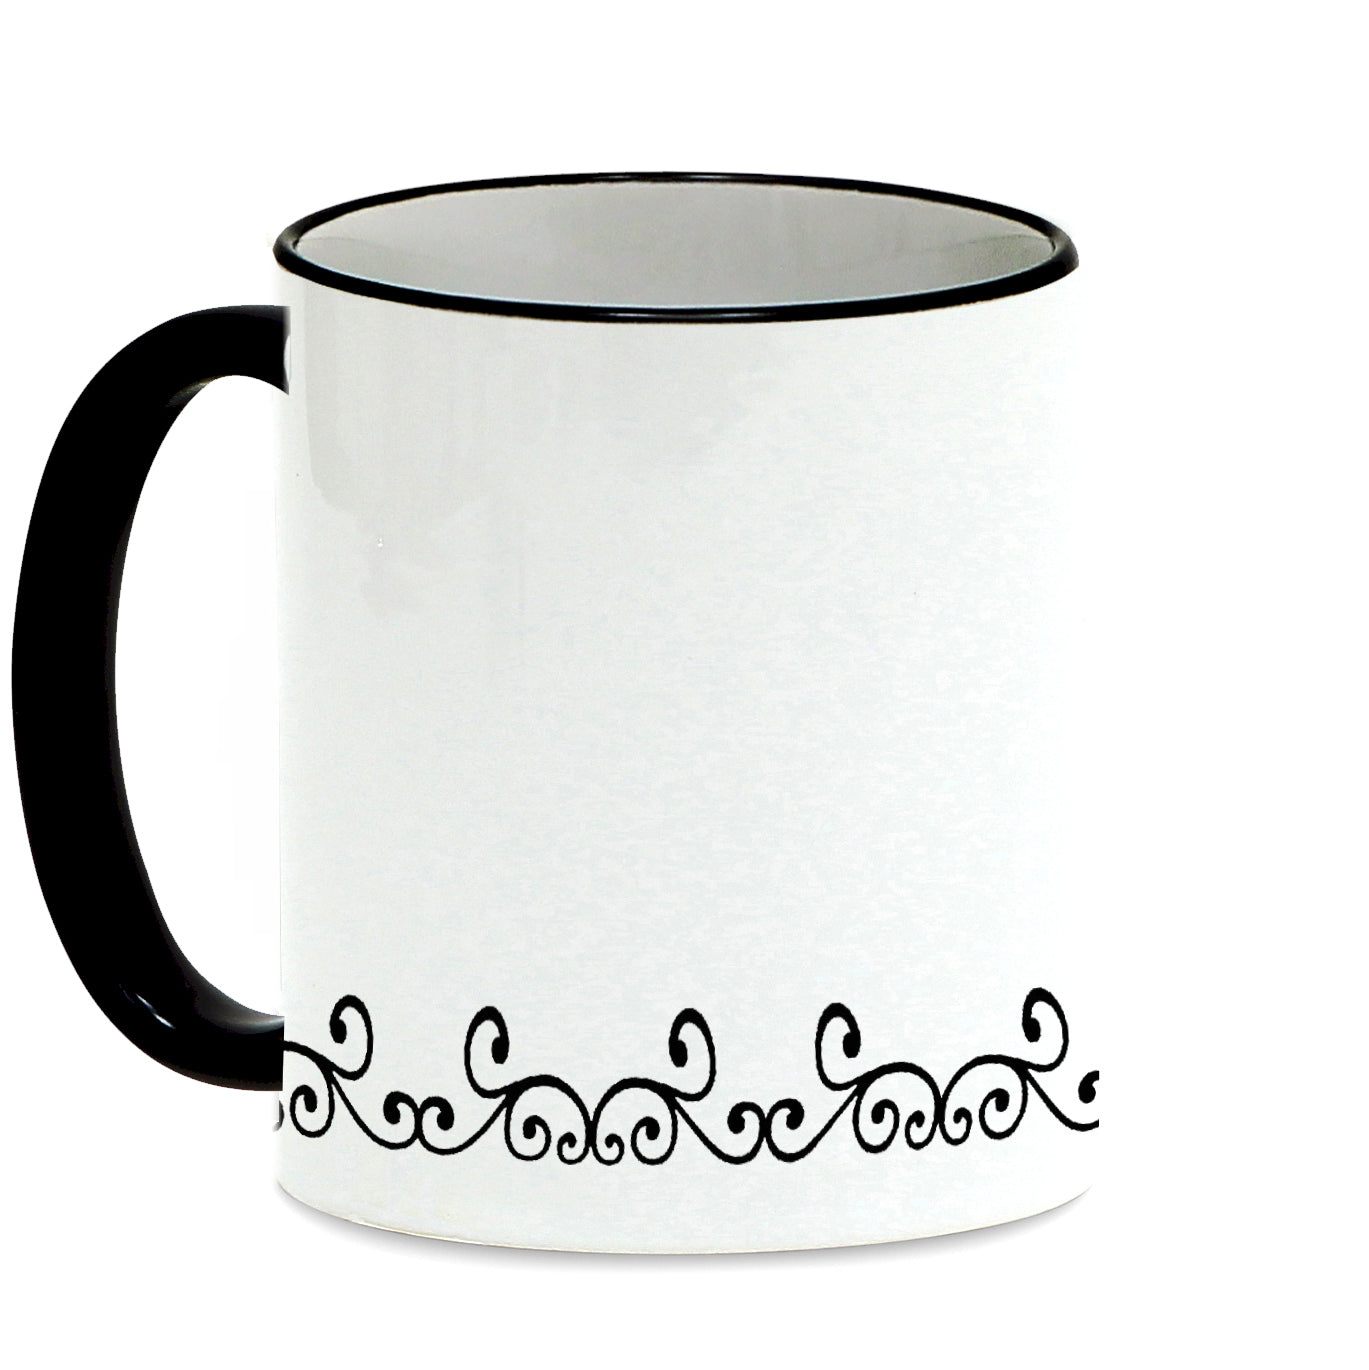 SUBLIMART: Lineart - Mug with black handle and rim featuring hand drawn line drawings. (Design #25)